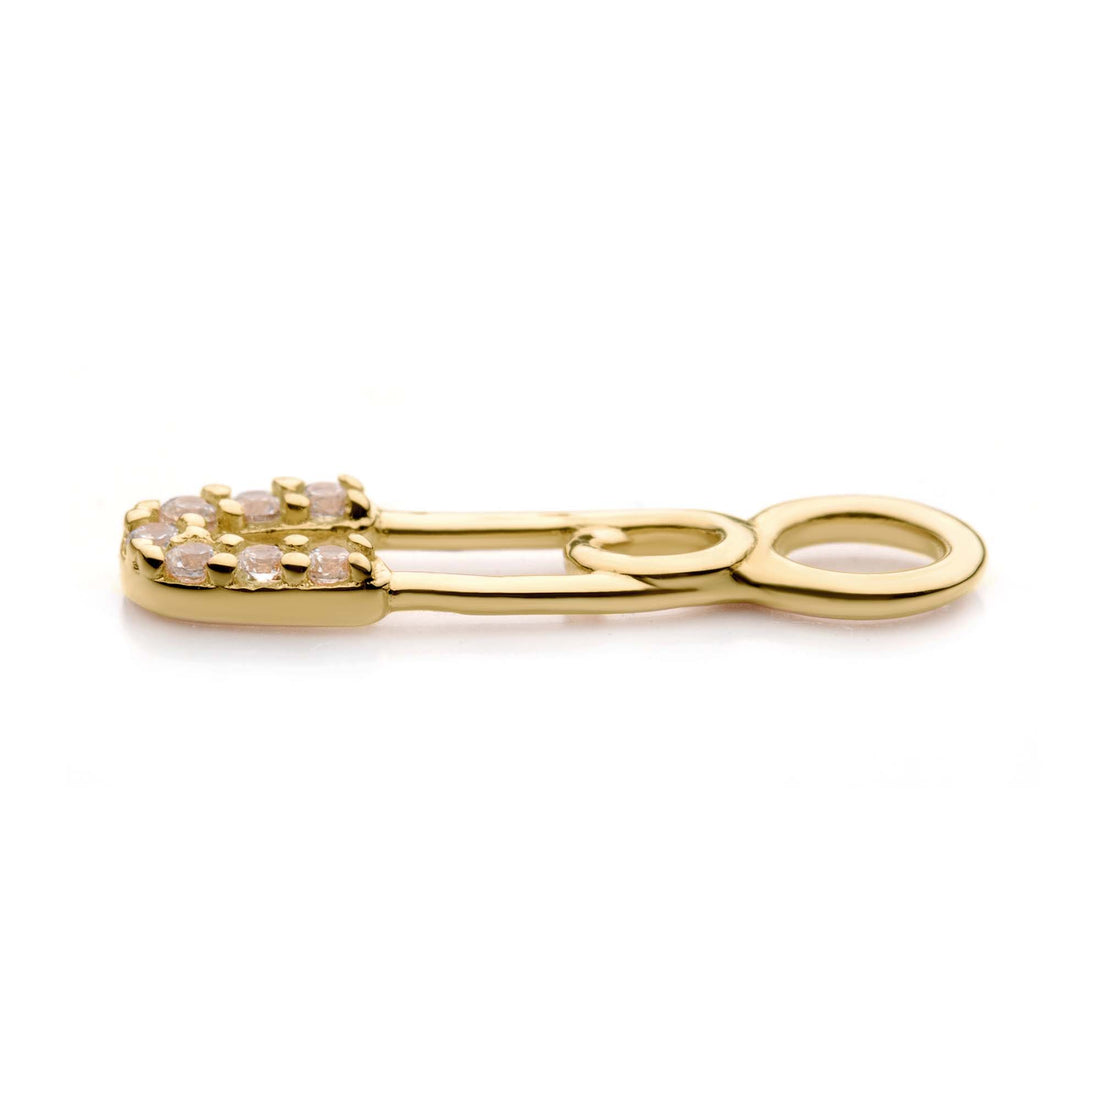 14Kt Yellow Gold Safety Pin with 3-Clear CZ Charm